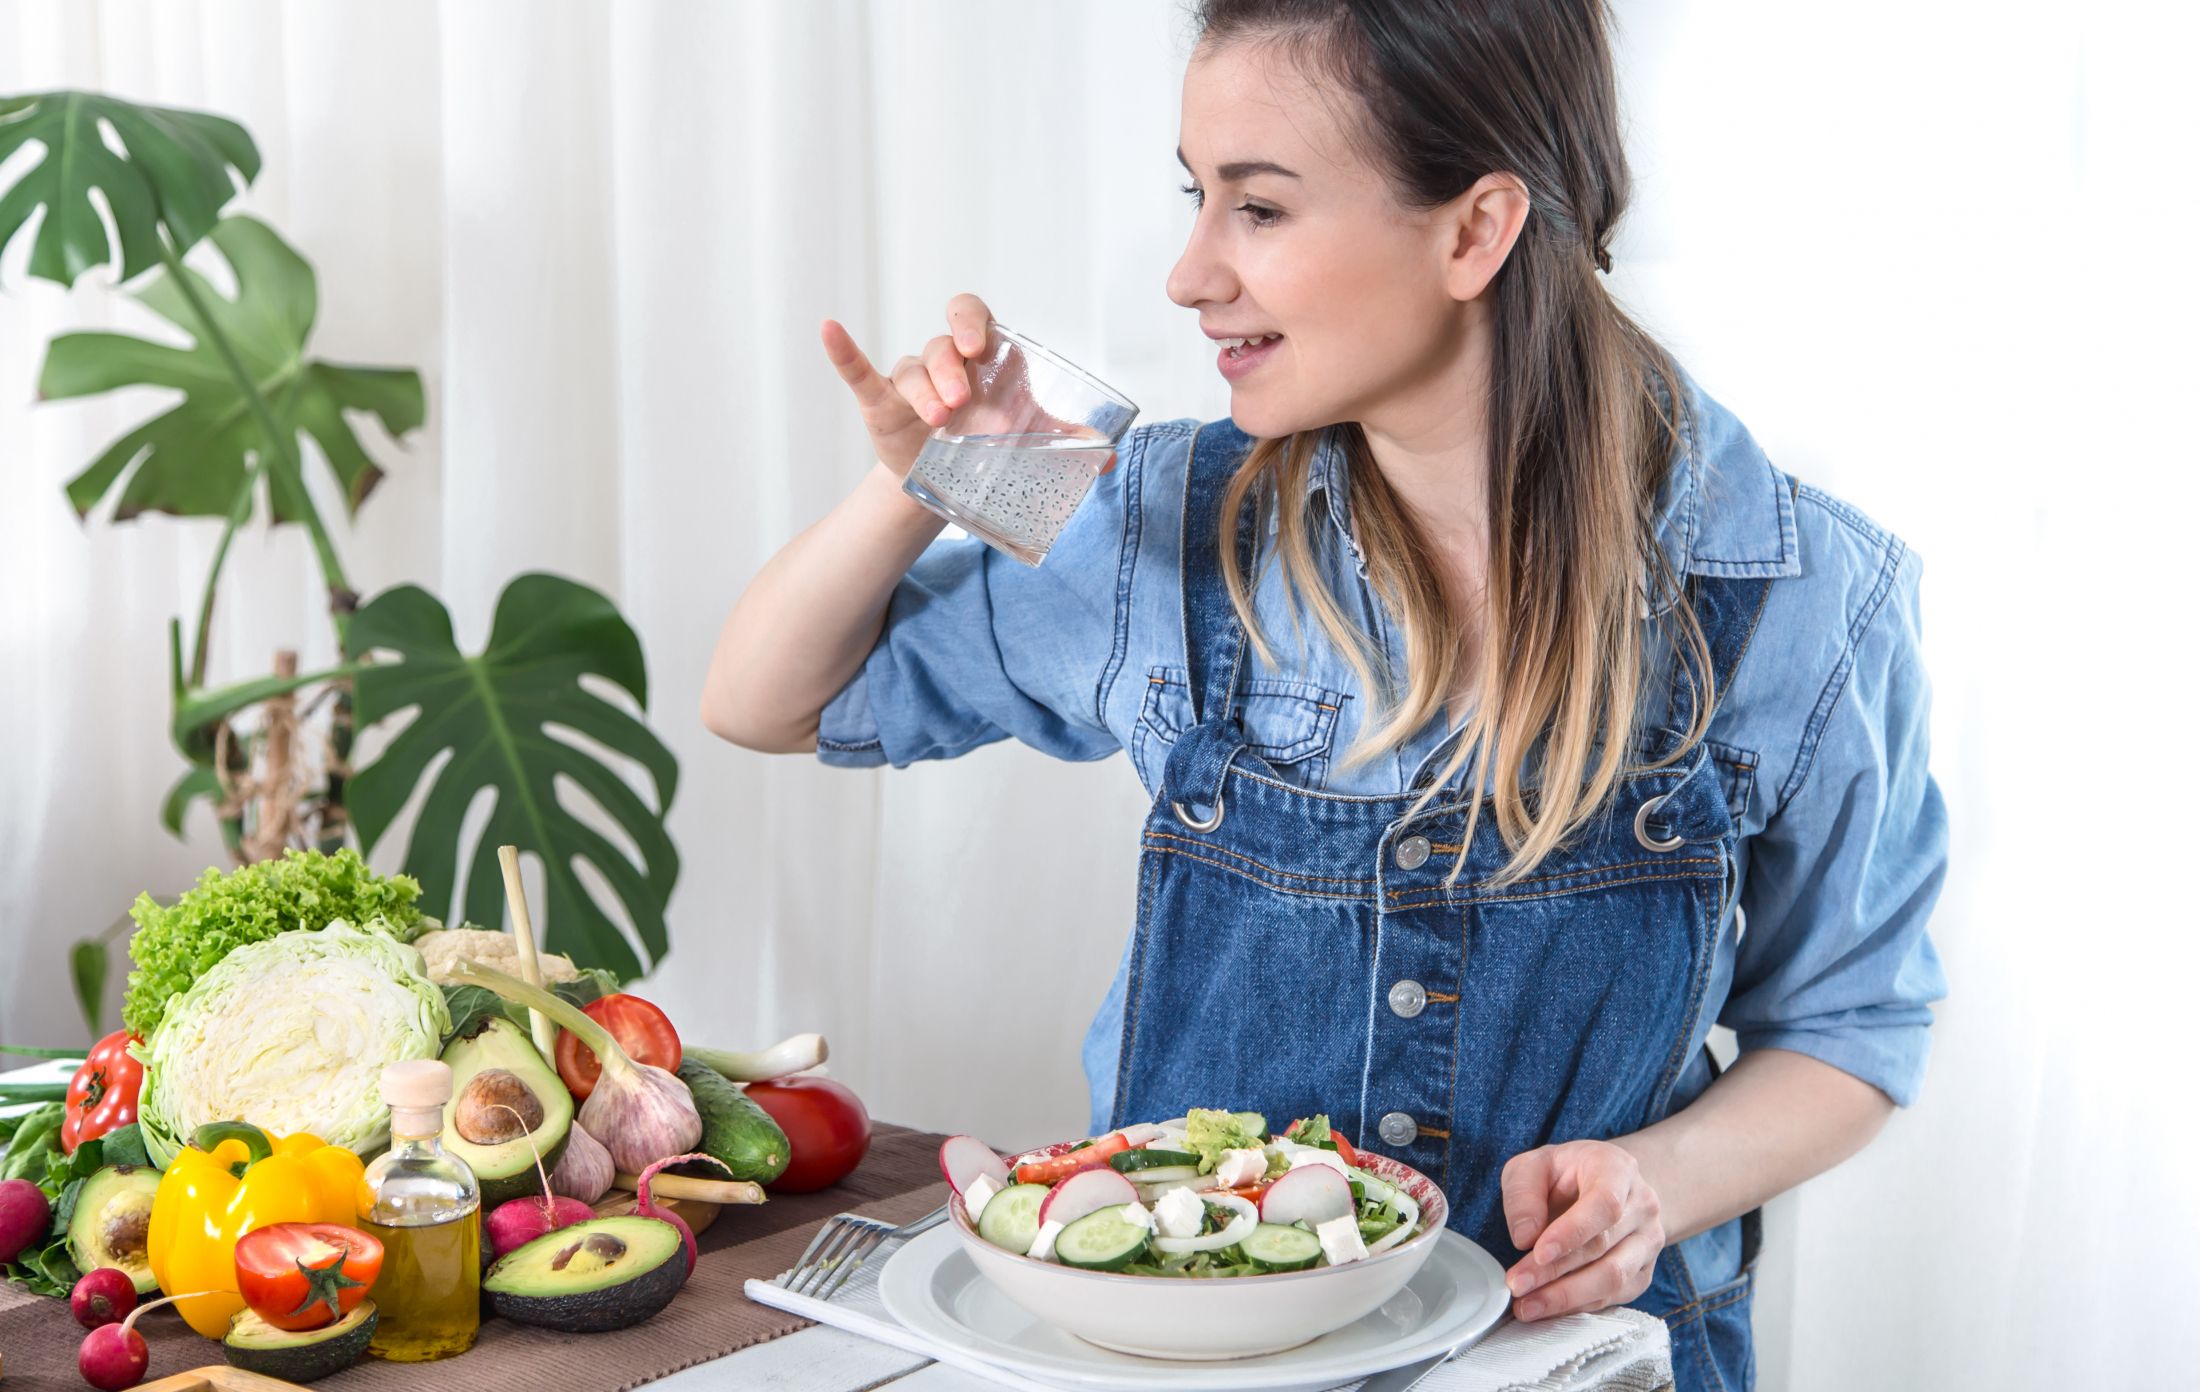 a-young-woman-drinks-water-at-a-table-with-vegetables-on-a-light-background-dressed-in-denim-clothes-healthy-food-and-drink-concept.jpg